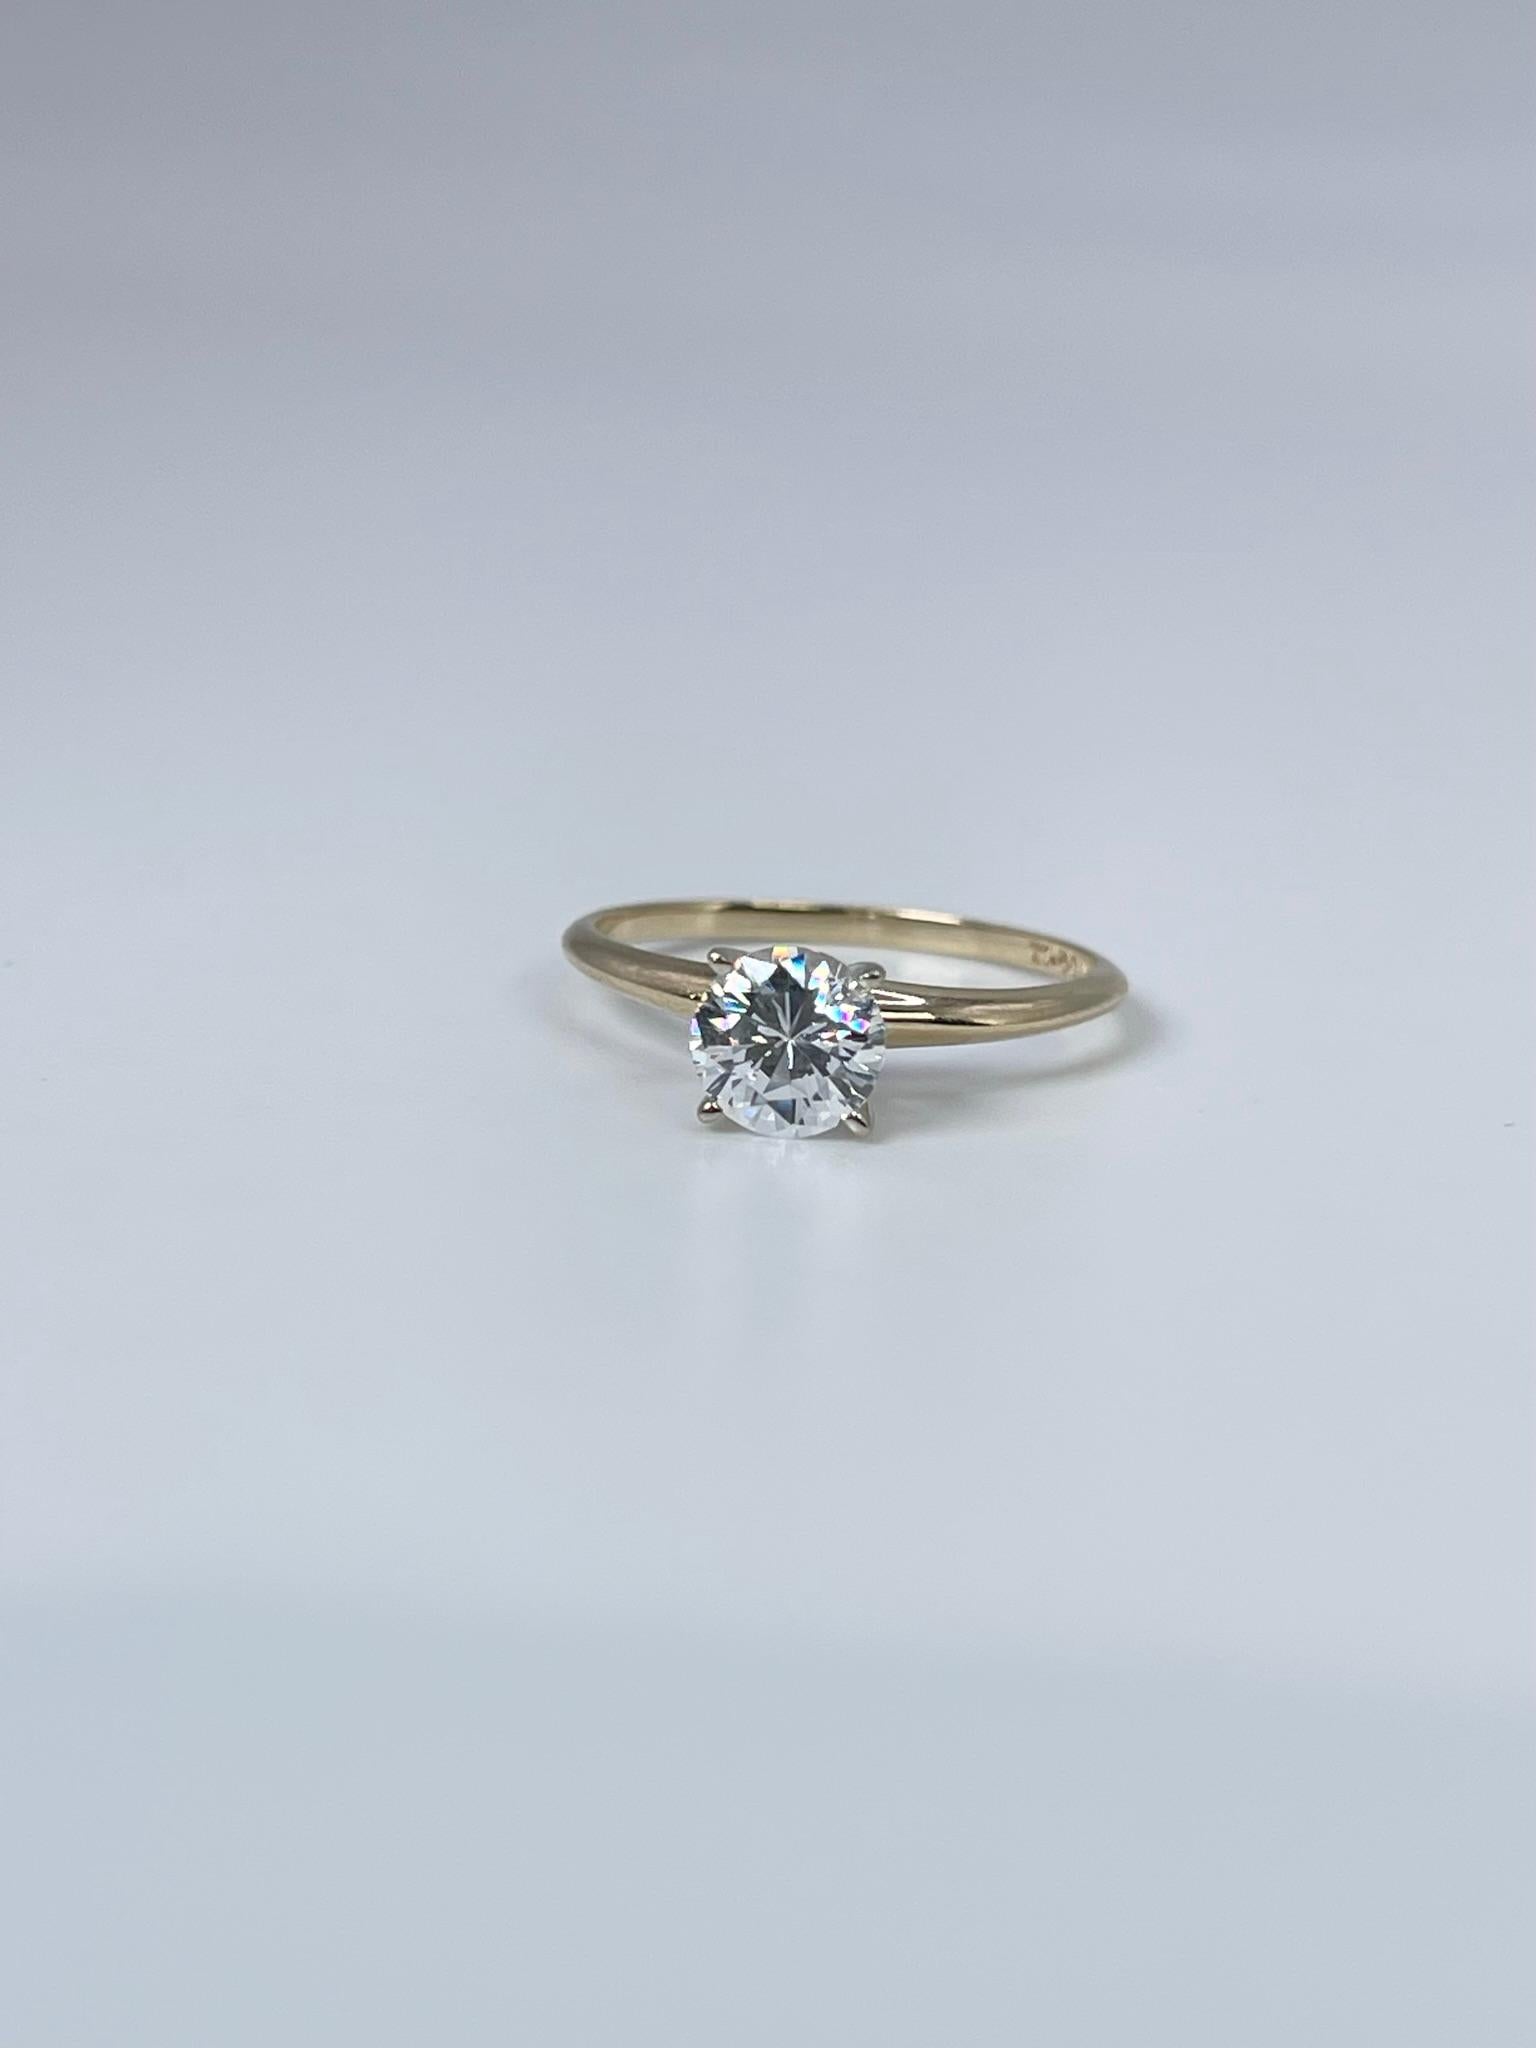 Certified moissanite solitaire ring in 14KT yellow gold, great for marriage, travel ring or promise ring. Comes with certificate of card for moissanite as well as certificate of authenticity for the ring.

GRAM WEIGHT: 2.08gr
GOLD: 14KT yellow